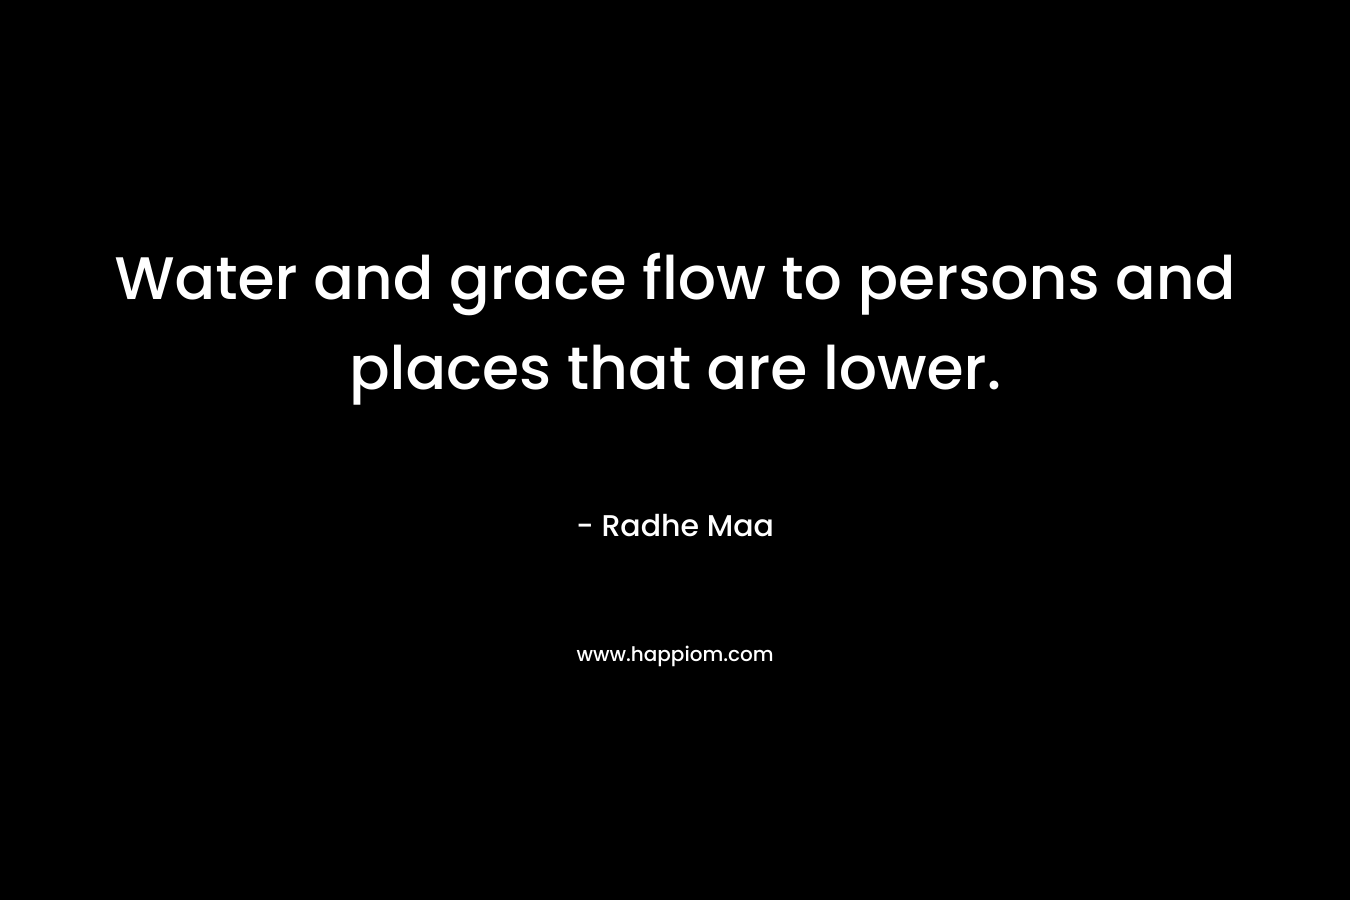 Water and grace flow to persons and places that are lower.